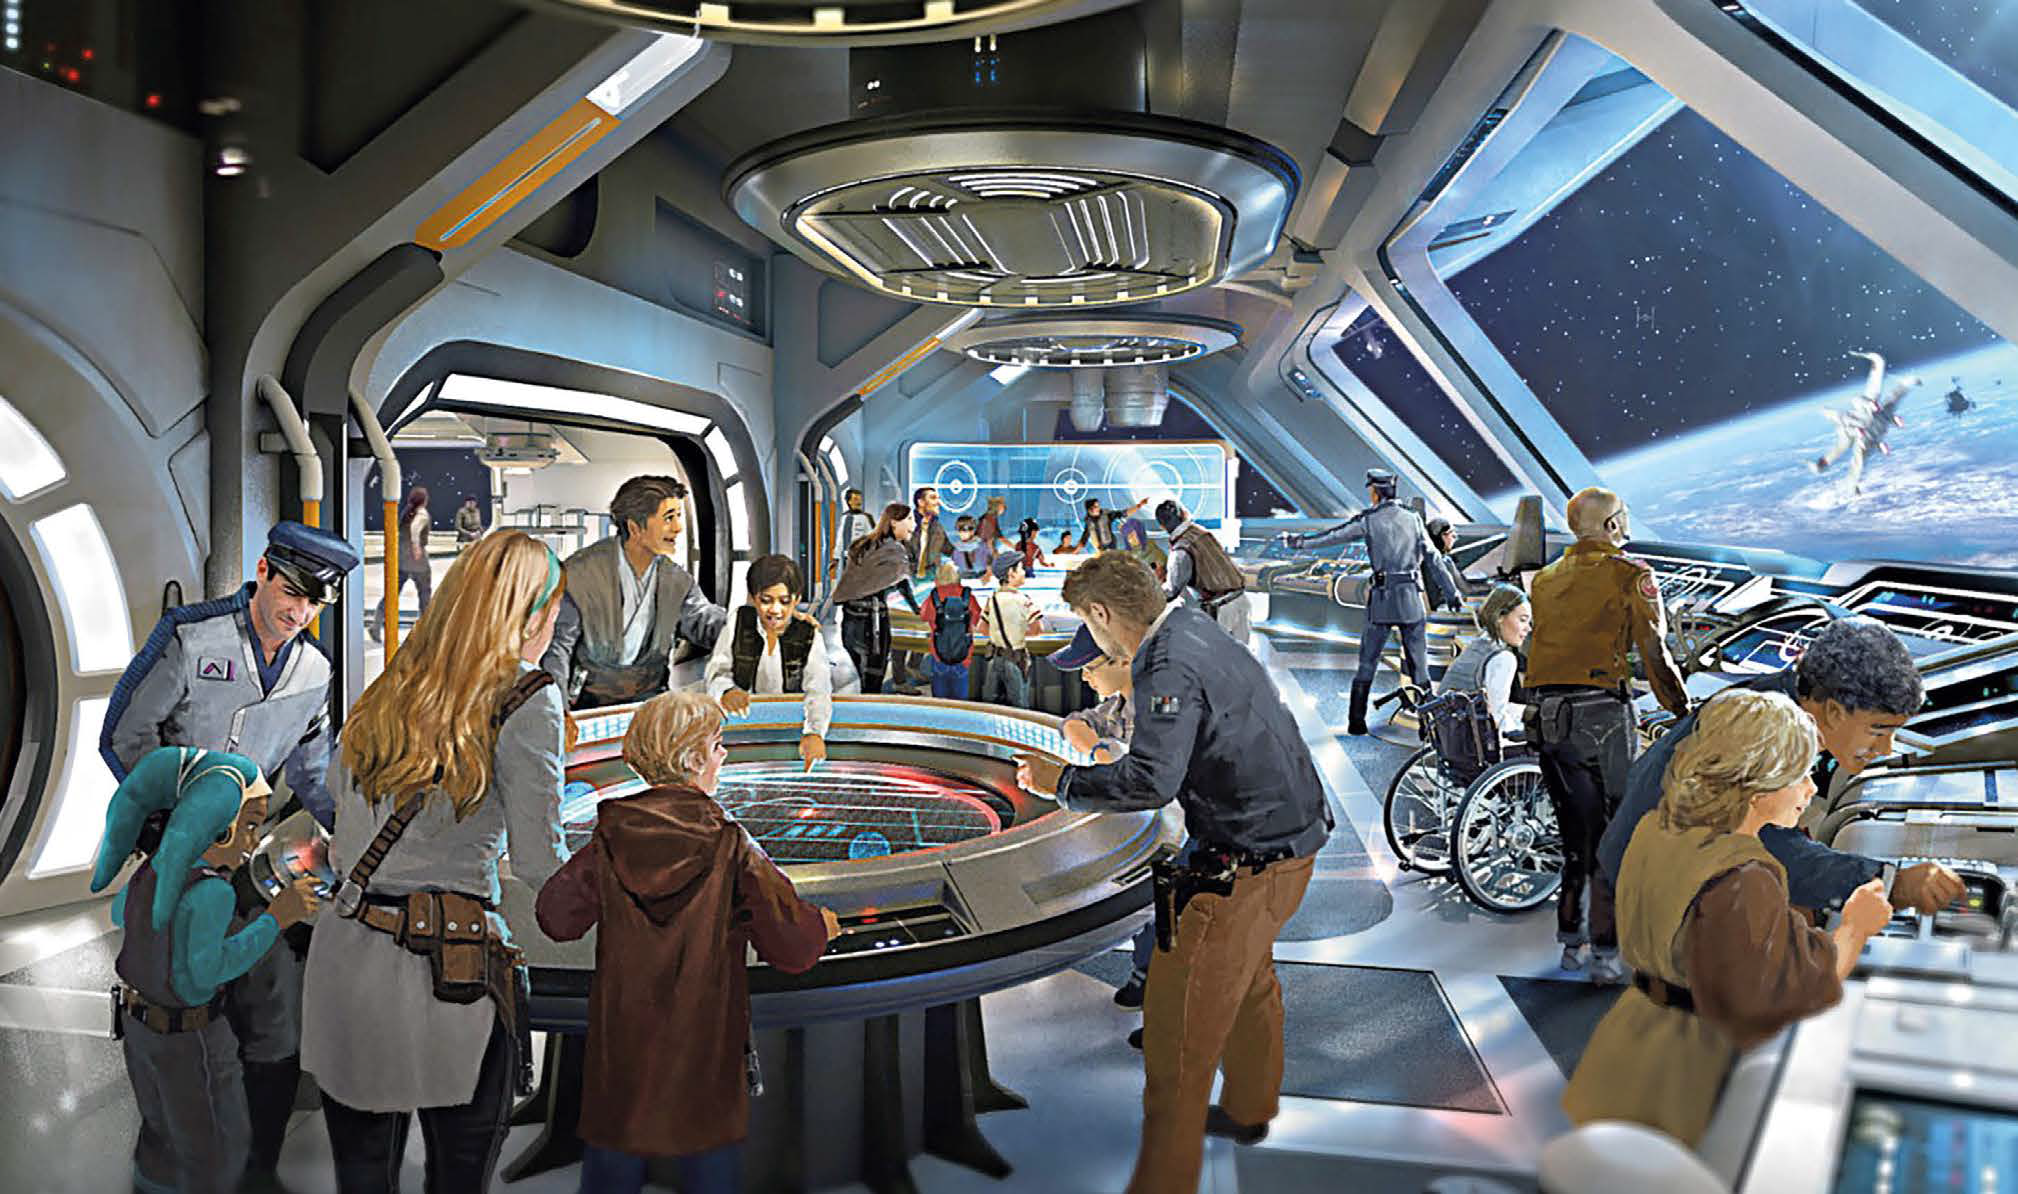 Disney Parks announce Star Wars projects around the world